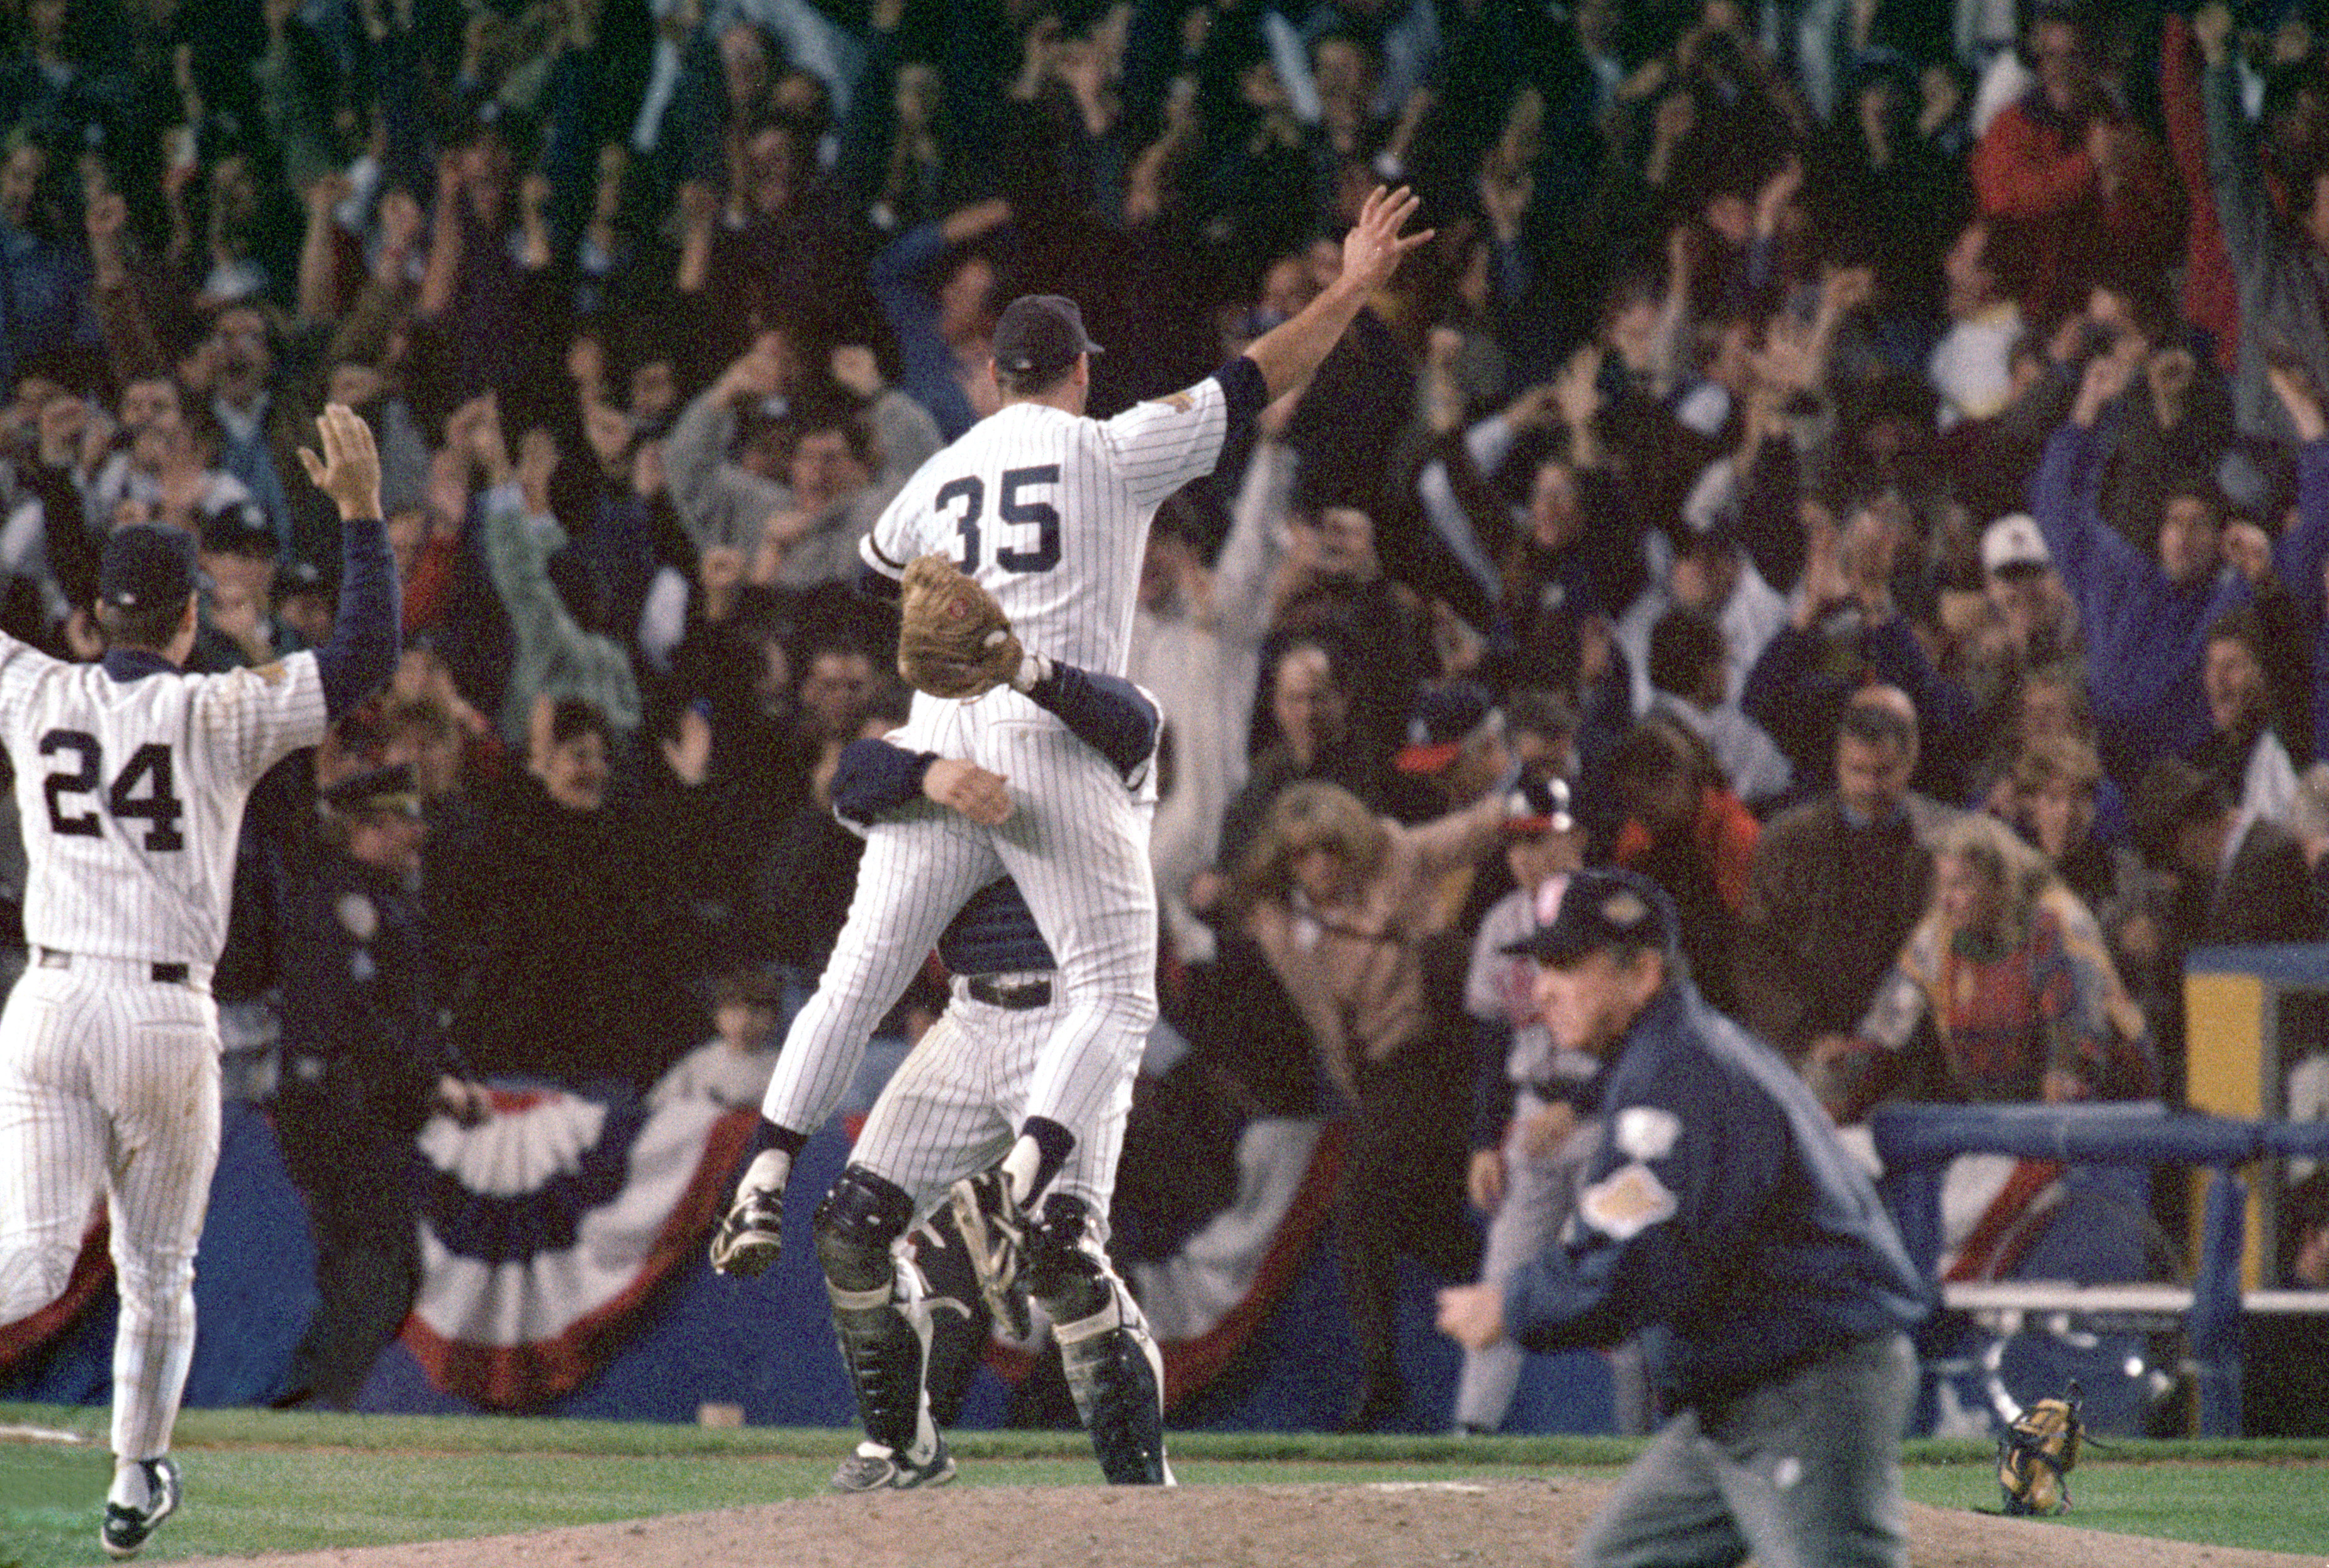 BRONX, NY - OCTOBER 26:  John Wetteland #35 of the New York Yankees celebrates the final out of Game six of the 1996 World Series against the Atlanta Braves at Yankee Stadium on October 26, 1996 in Bronx, New York. The Yankees defeated the Braves 3-2 to w